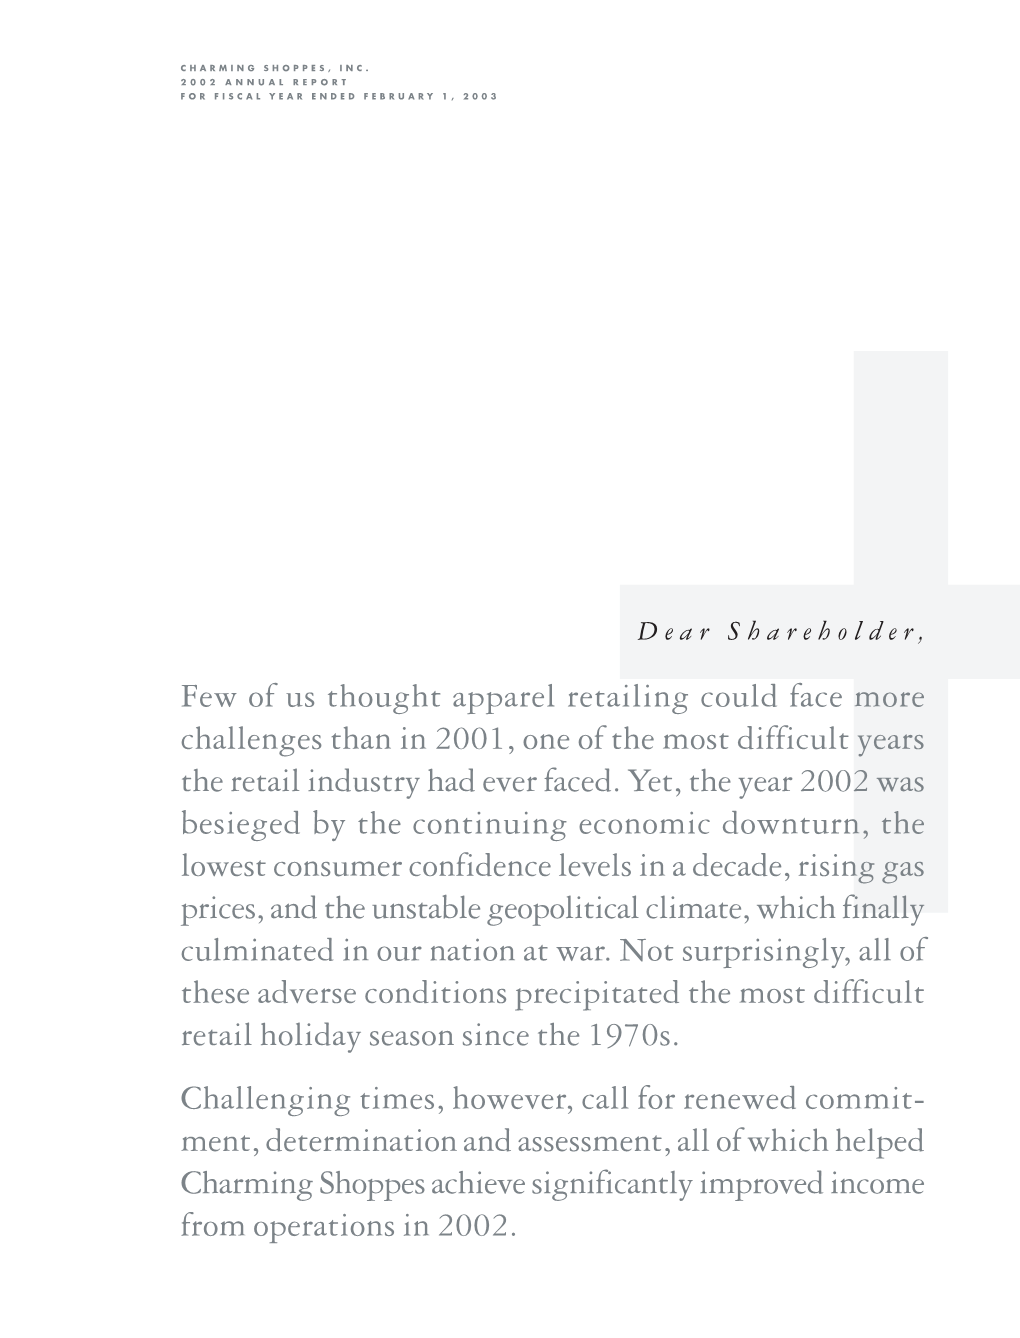 Charming Shoppes, Inc. 2002 Annual Report for Fiscal Year Ended February 1, 2003